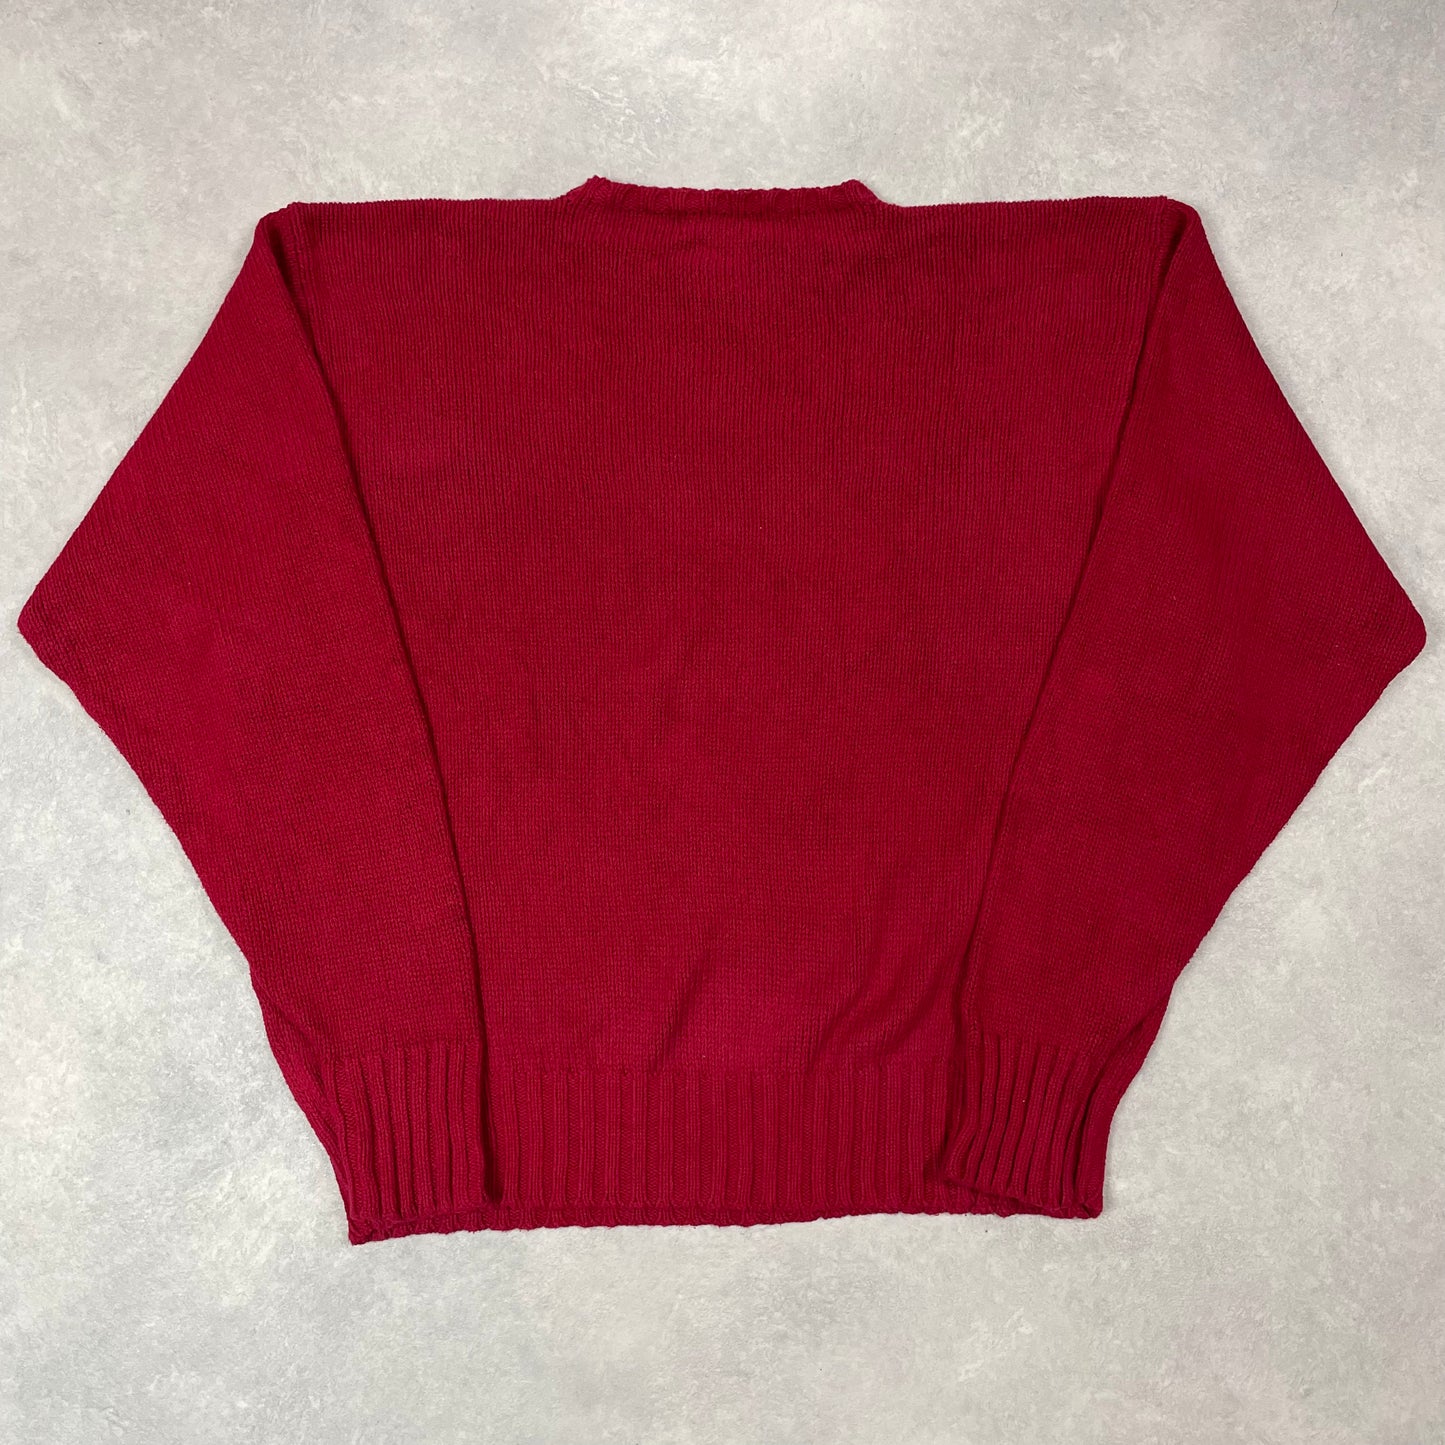 Vintage Polo Ralph Lauren Sweater Red Big Size